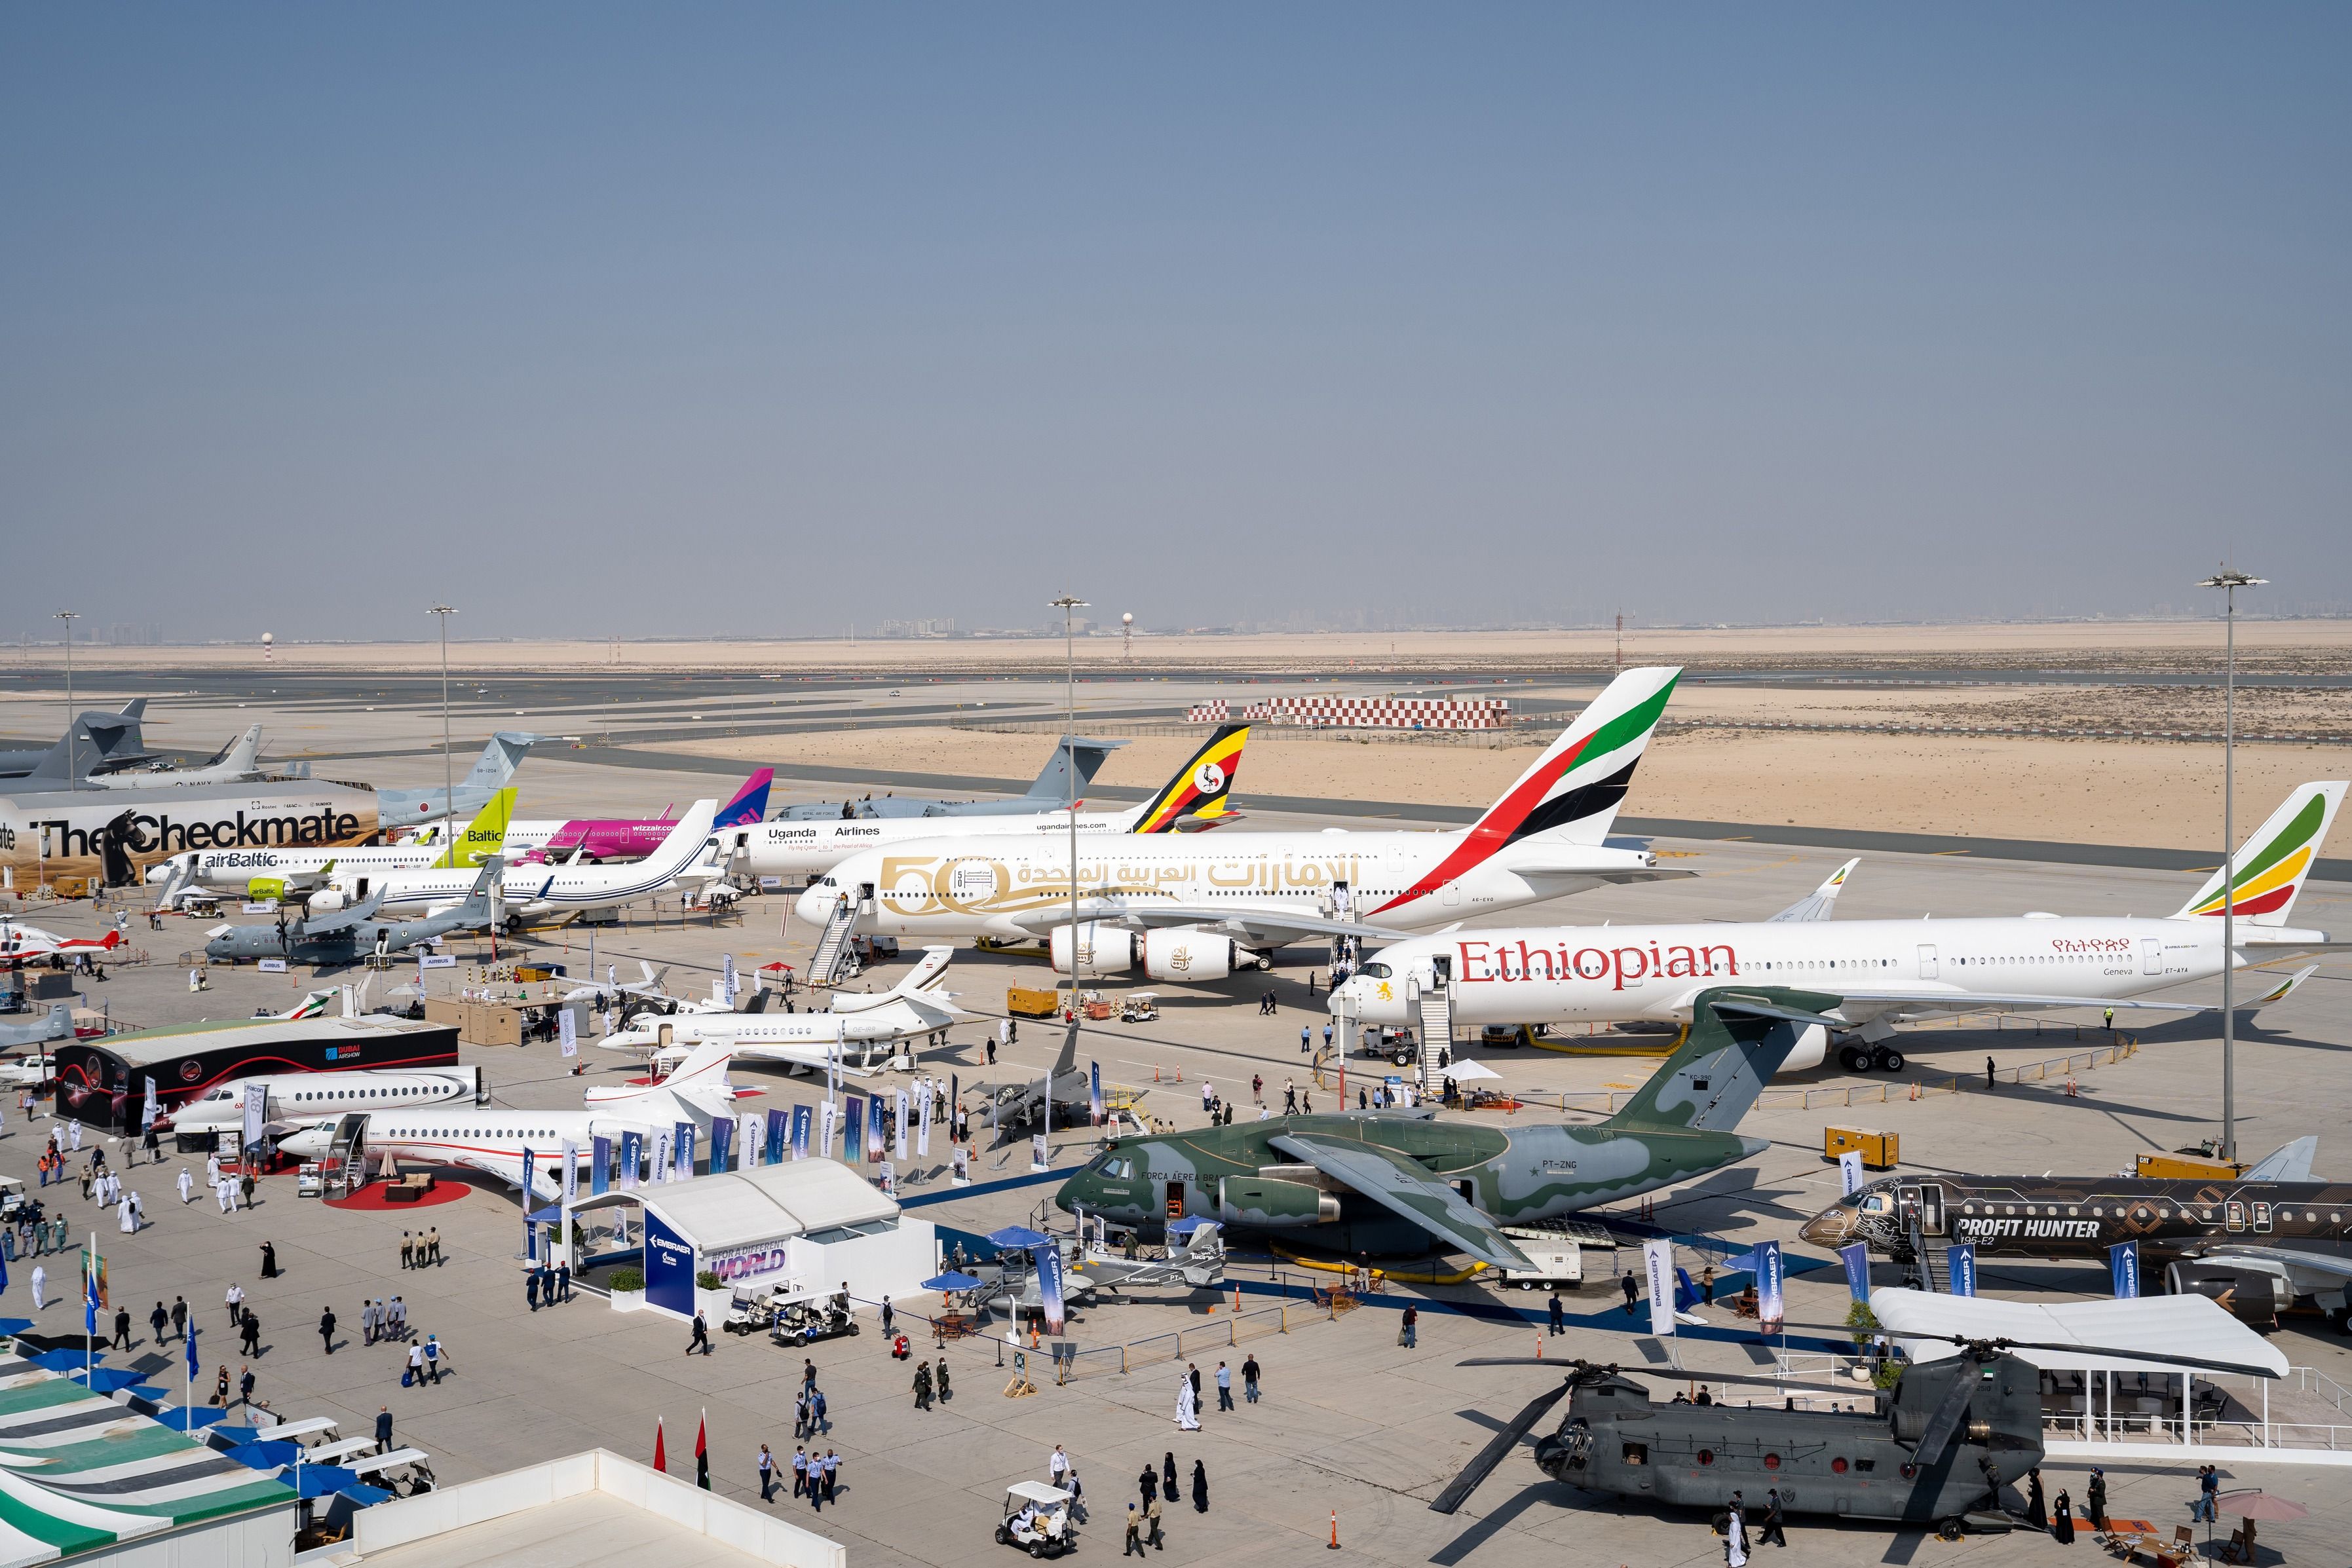 Aircraft from several commercial, private, and military operators parked at the Dubai Airshow 2021.